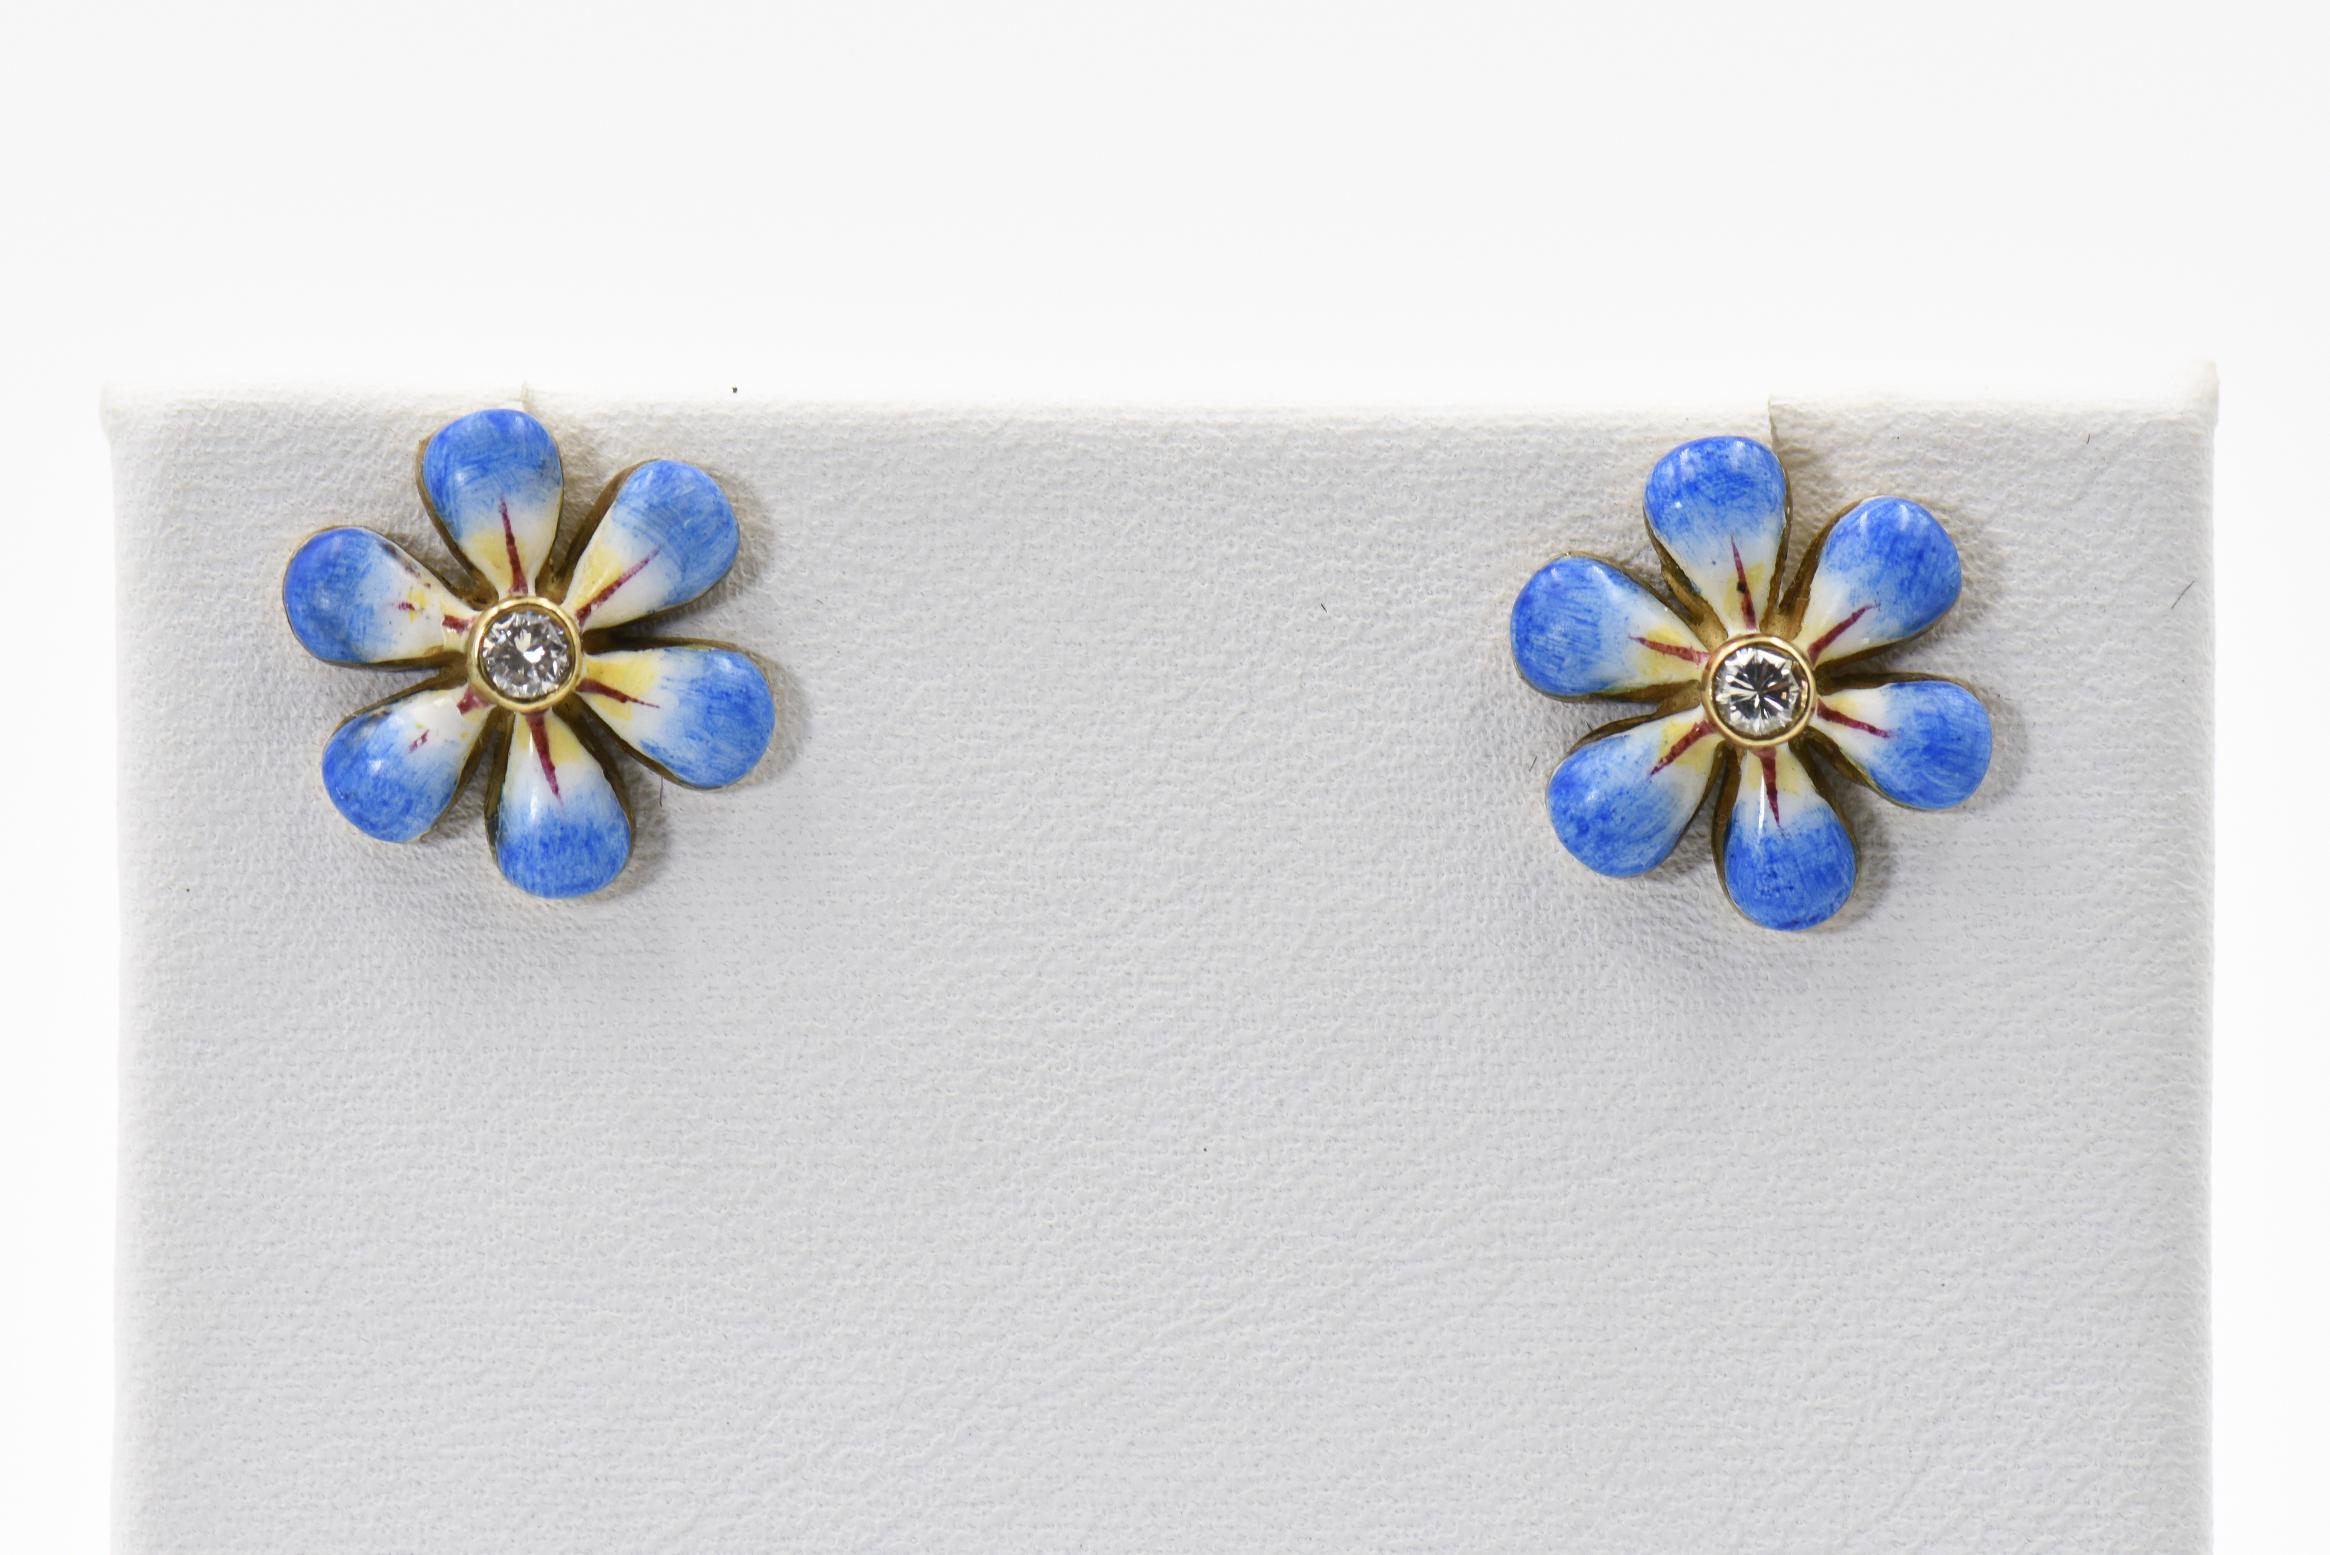 This pair of blue enamel daisy earrings are part of the daisy line, a beautiful handmade line of jewelry by Sandra J. Sensations. Each flower is hand painted by an enamel artist. The flowers are 14k with diamonds in the center. Each diamond is